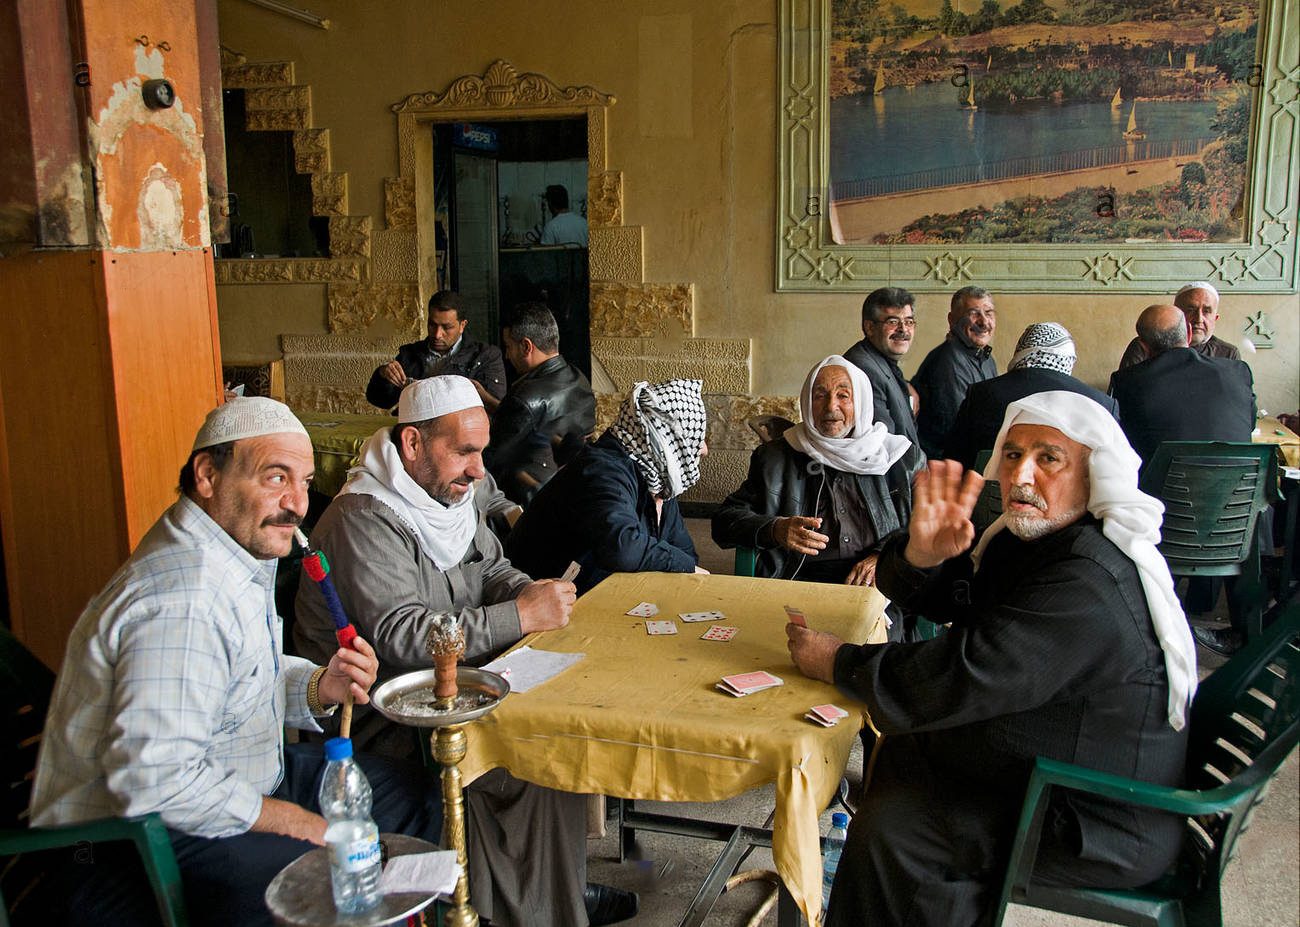 Syrian elders in Damascus café sipping tea and playing cards - 2011 Expressive (alamy)